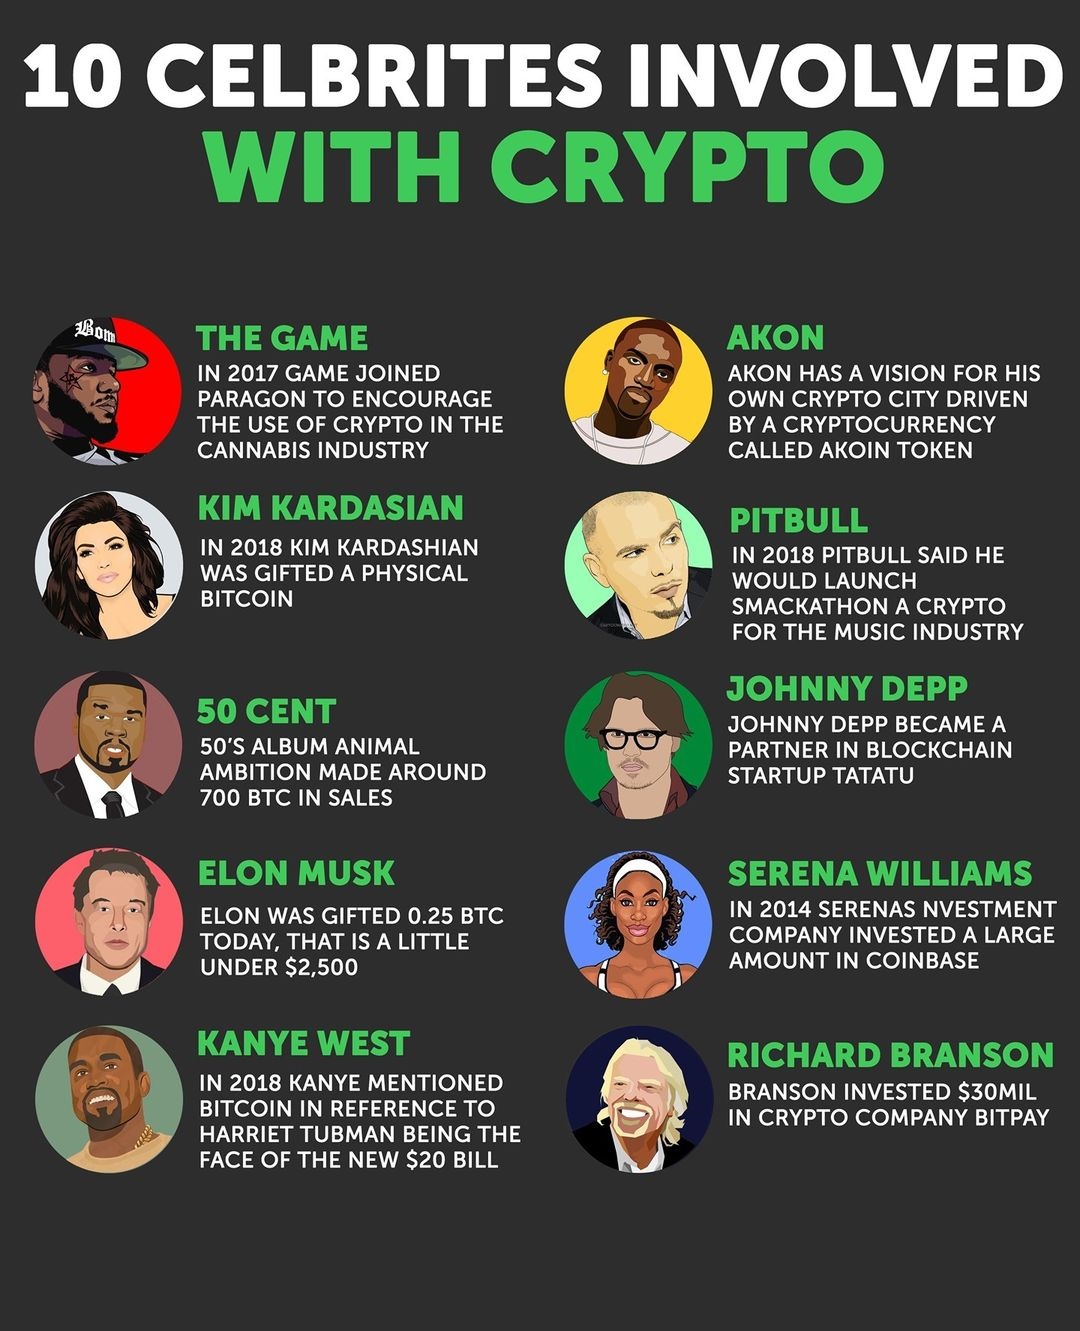 The top 10 celebrates involved in crypt.